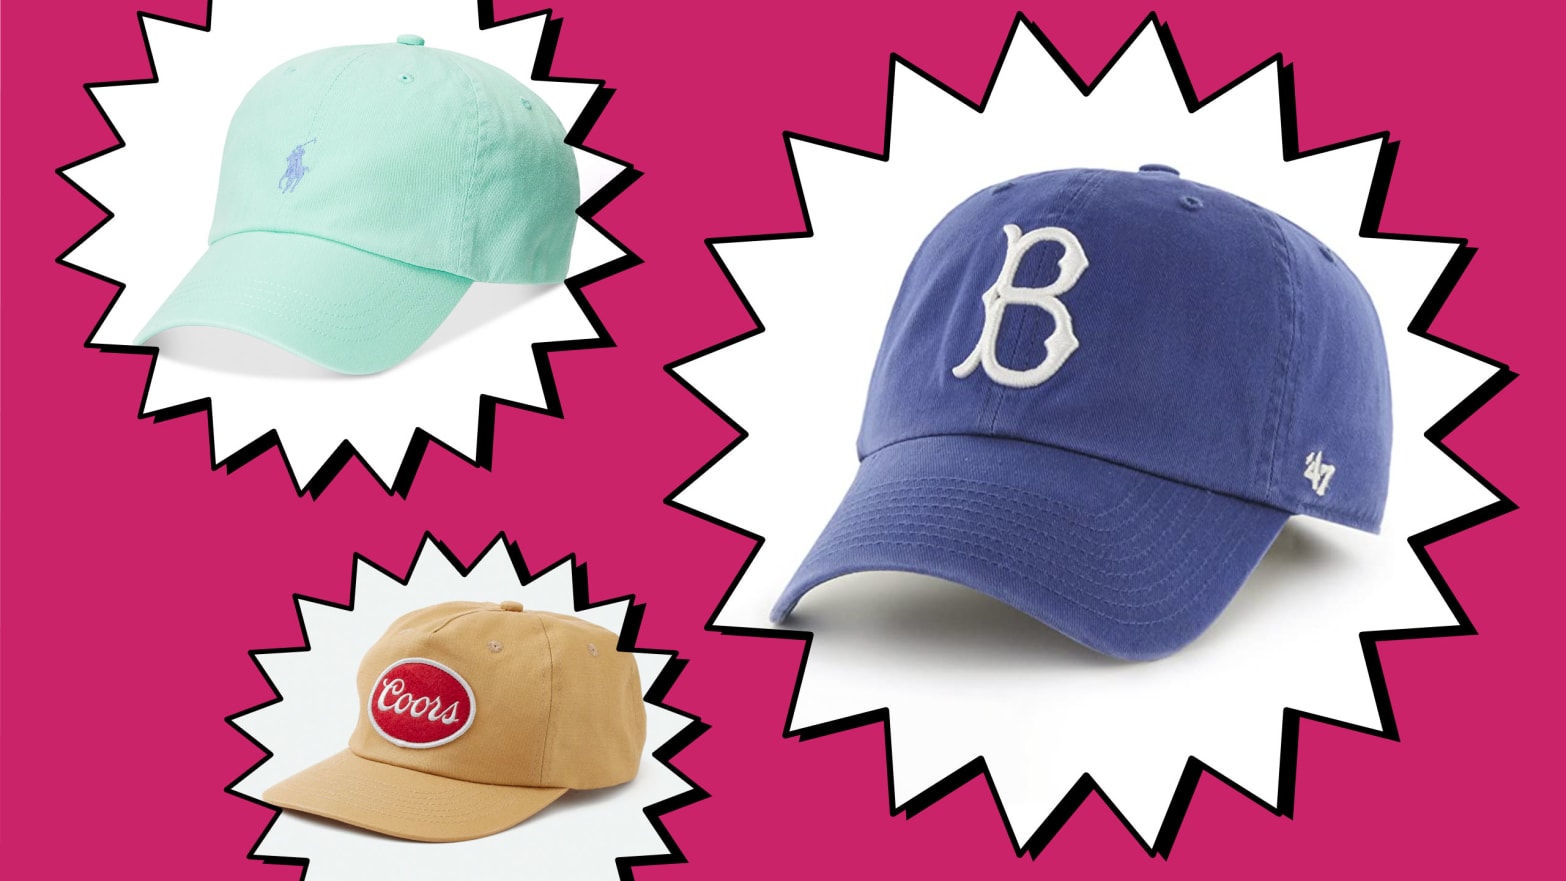 Dad Hats, Officially Licensed Brands & Teams